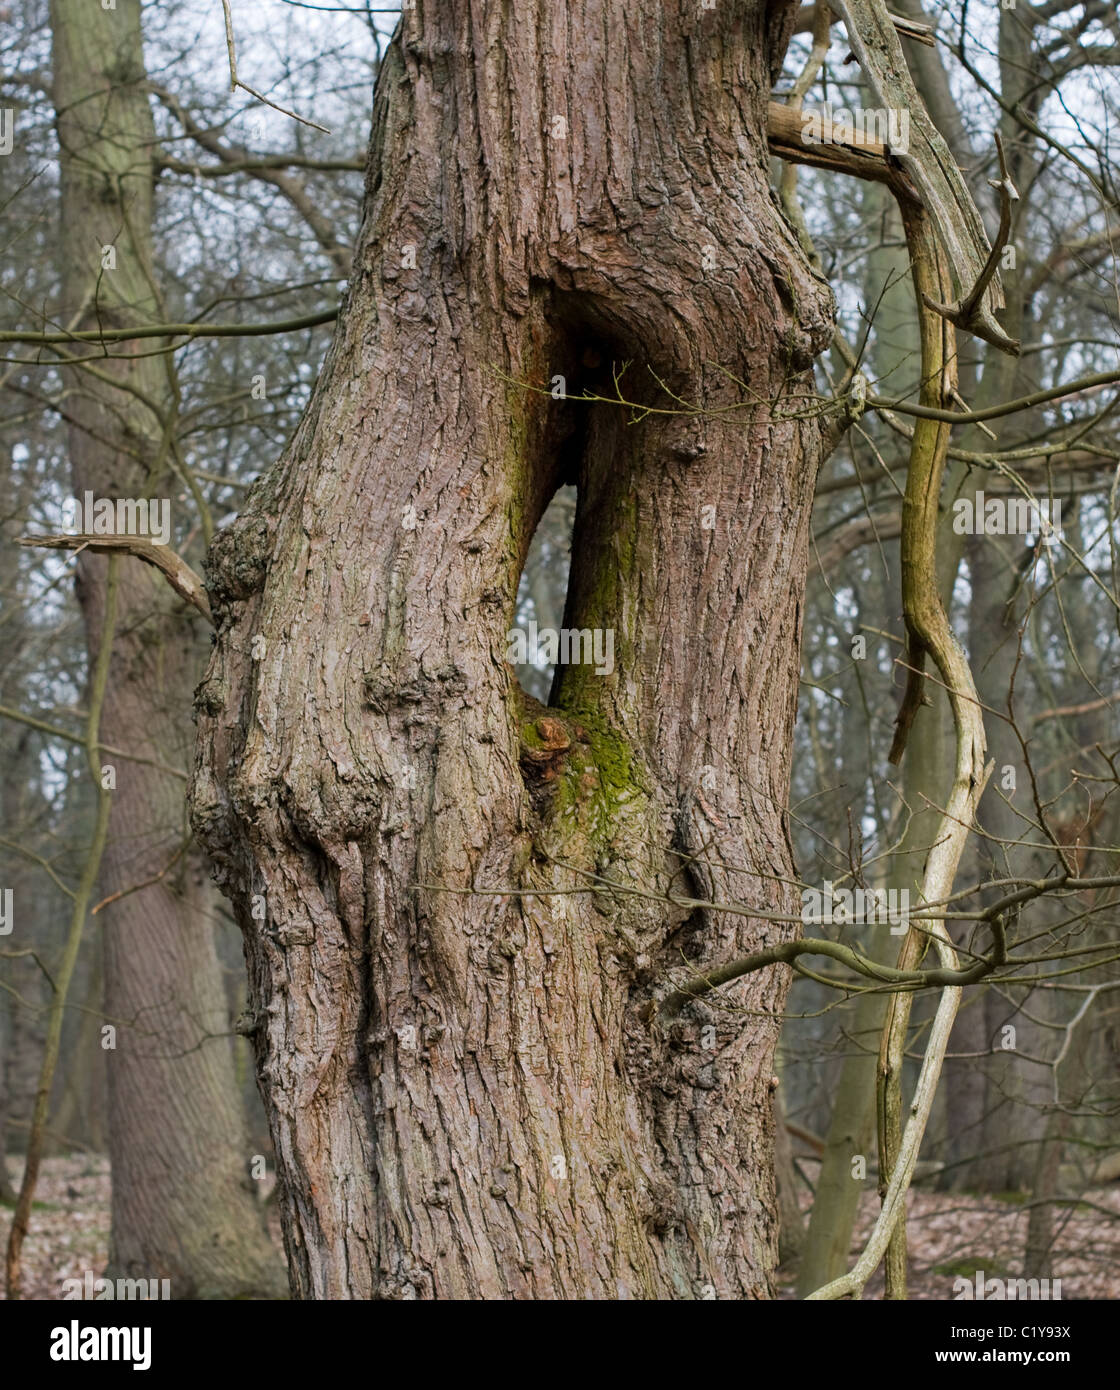 Strange tree with a naturally occurring hole in the middle. Stock Photo